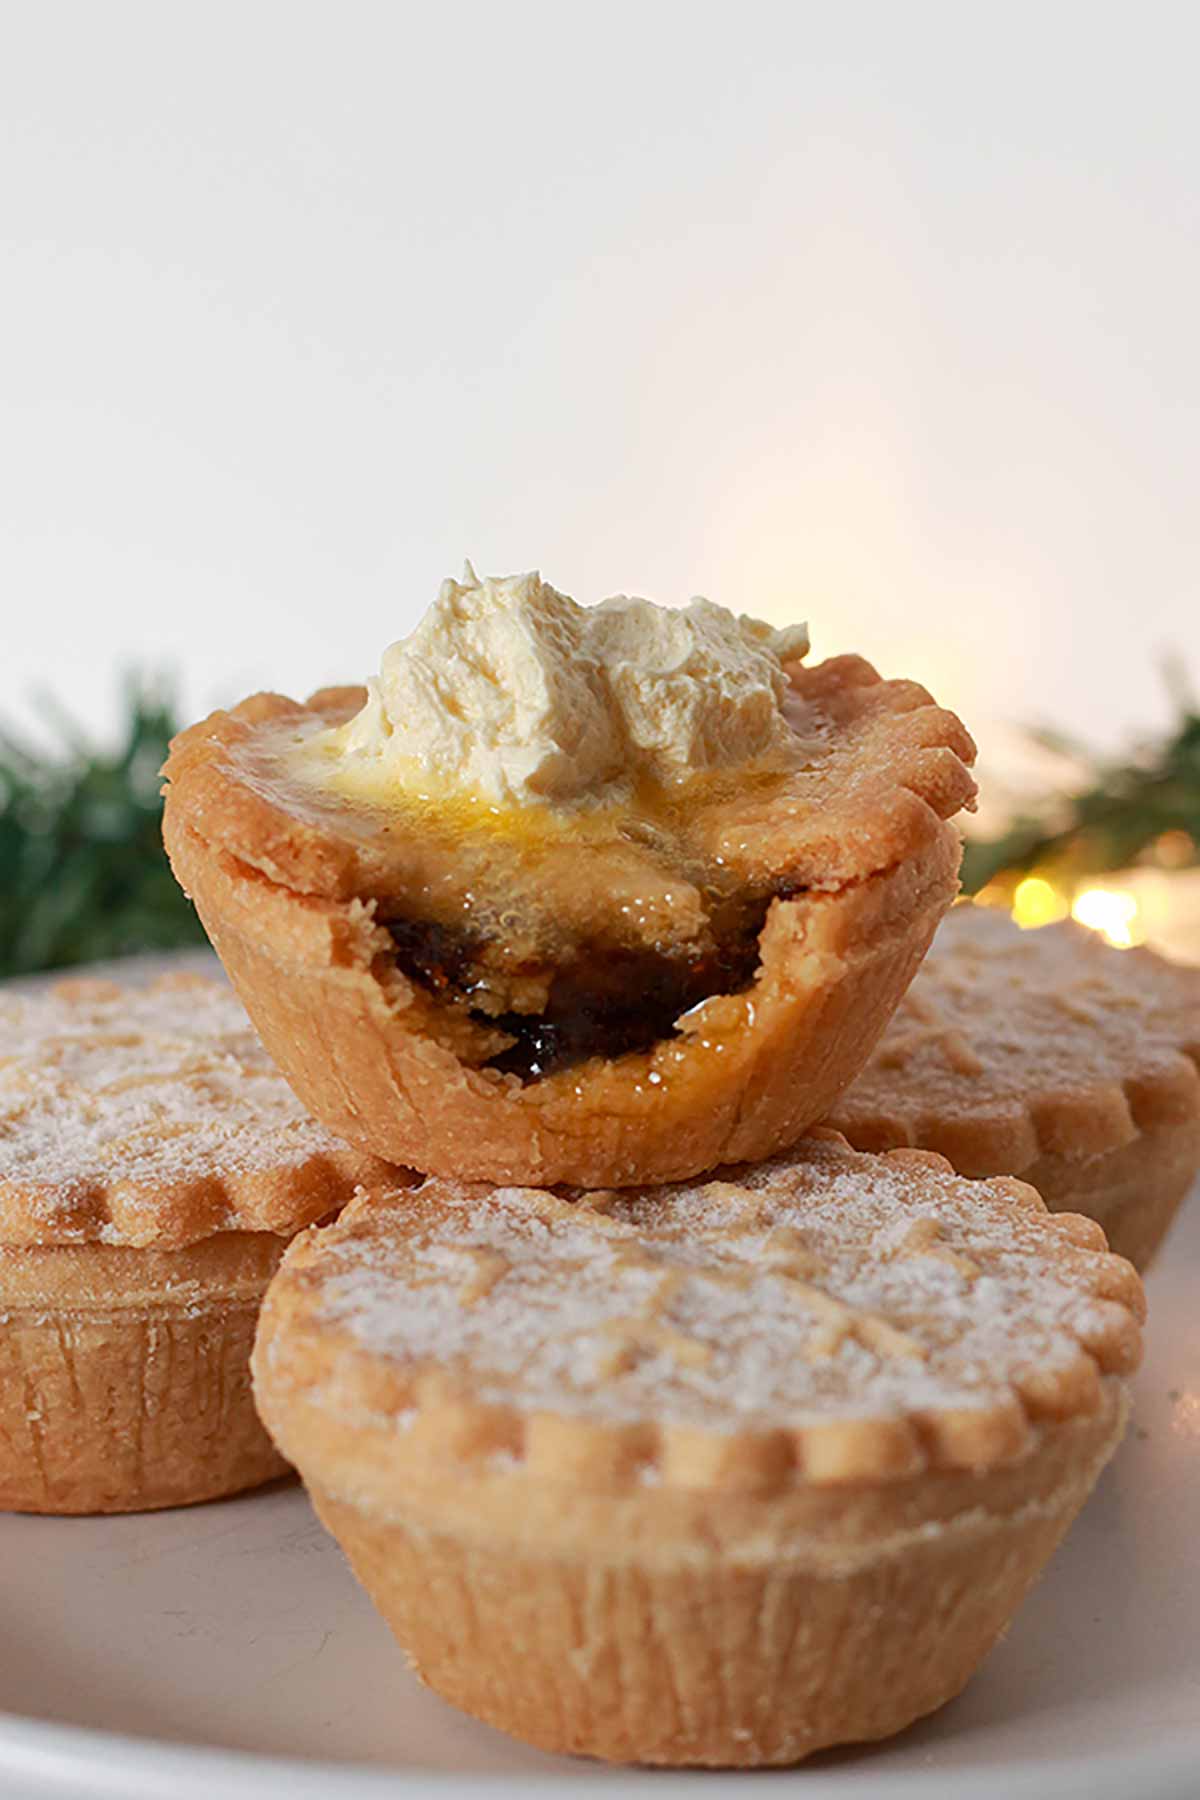 Mince Pie With A Bite Taken Out Of It And Brandy Butter On Top